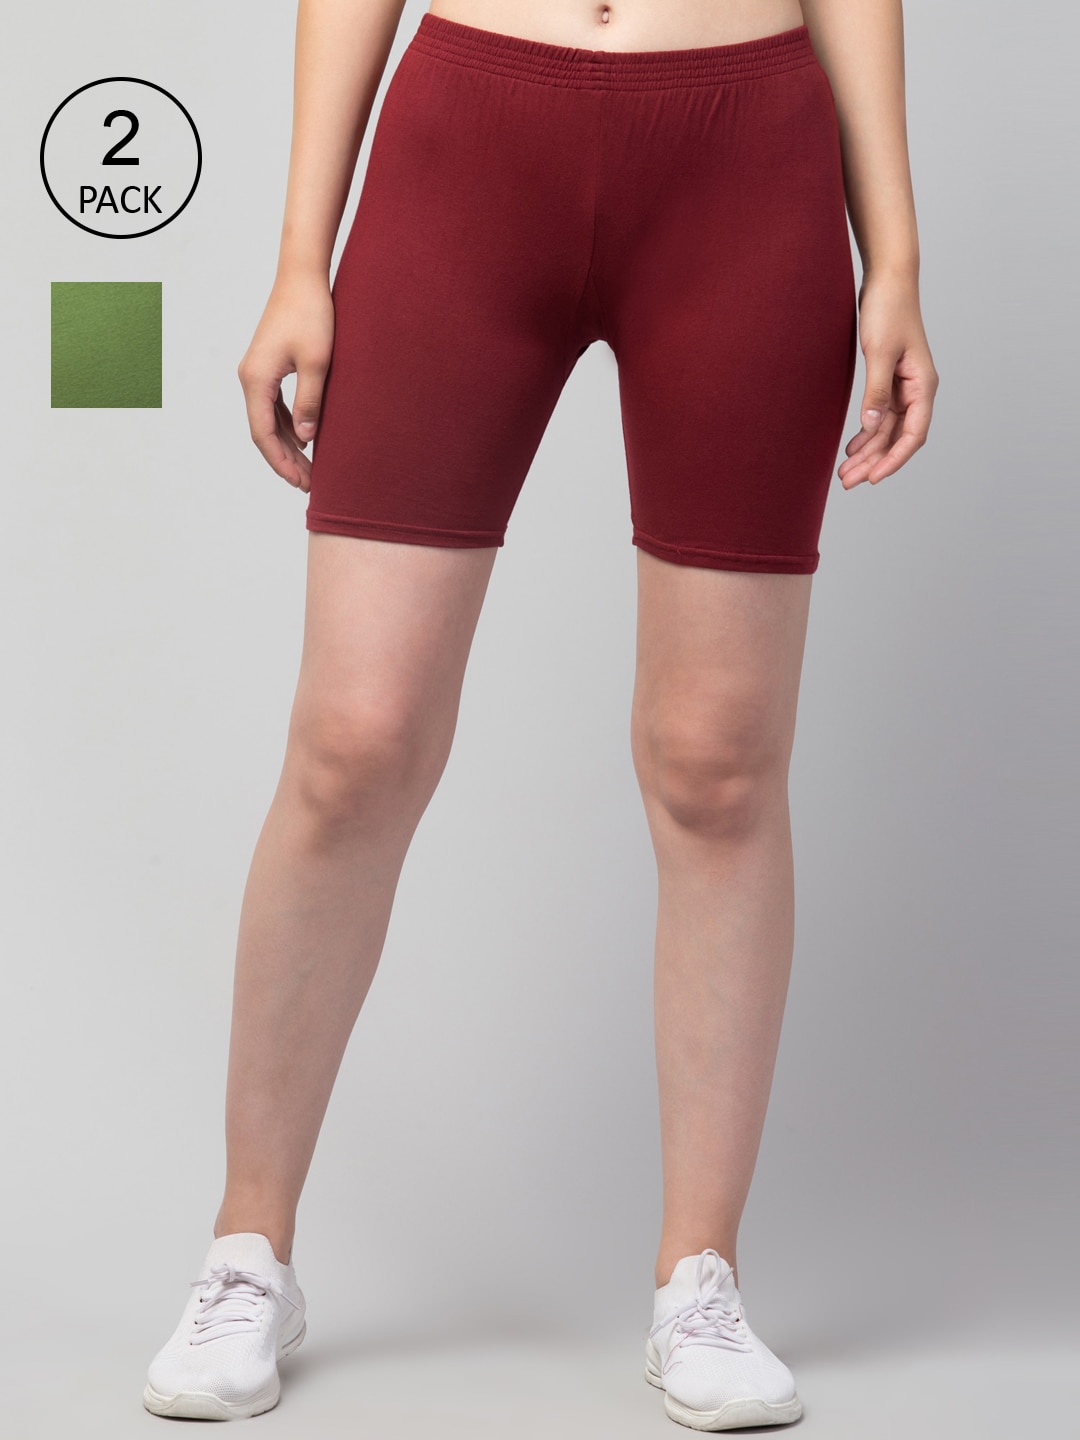 Apraa & Parma Women Set Of 2 Maroon & Green Solid Cotton Slim Fit Cycling Shorts Price in India